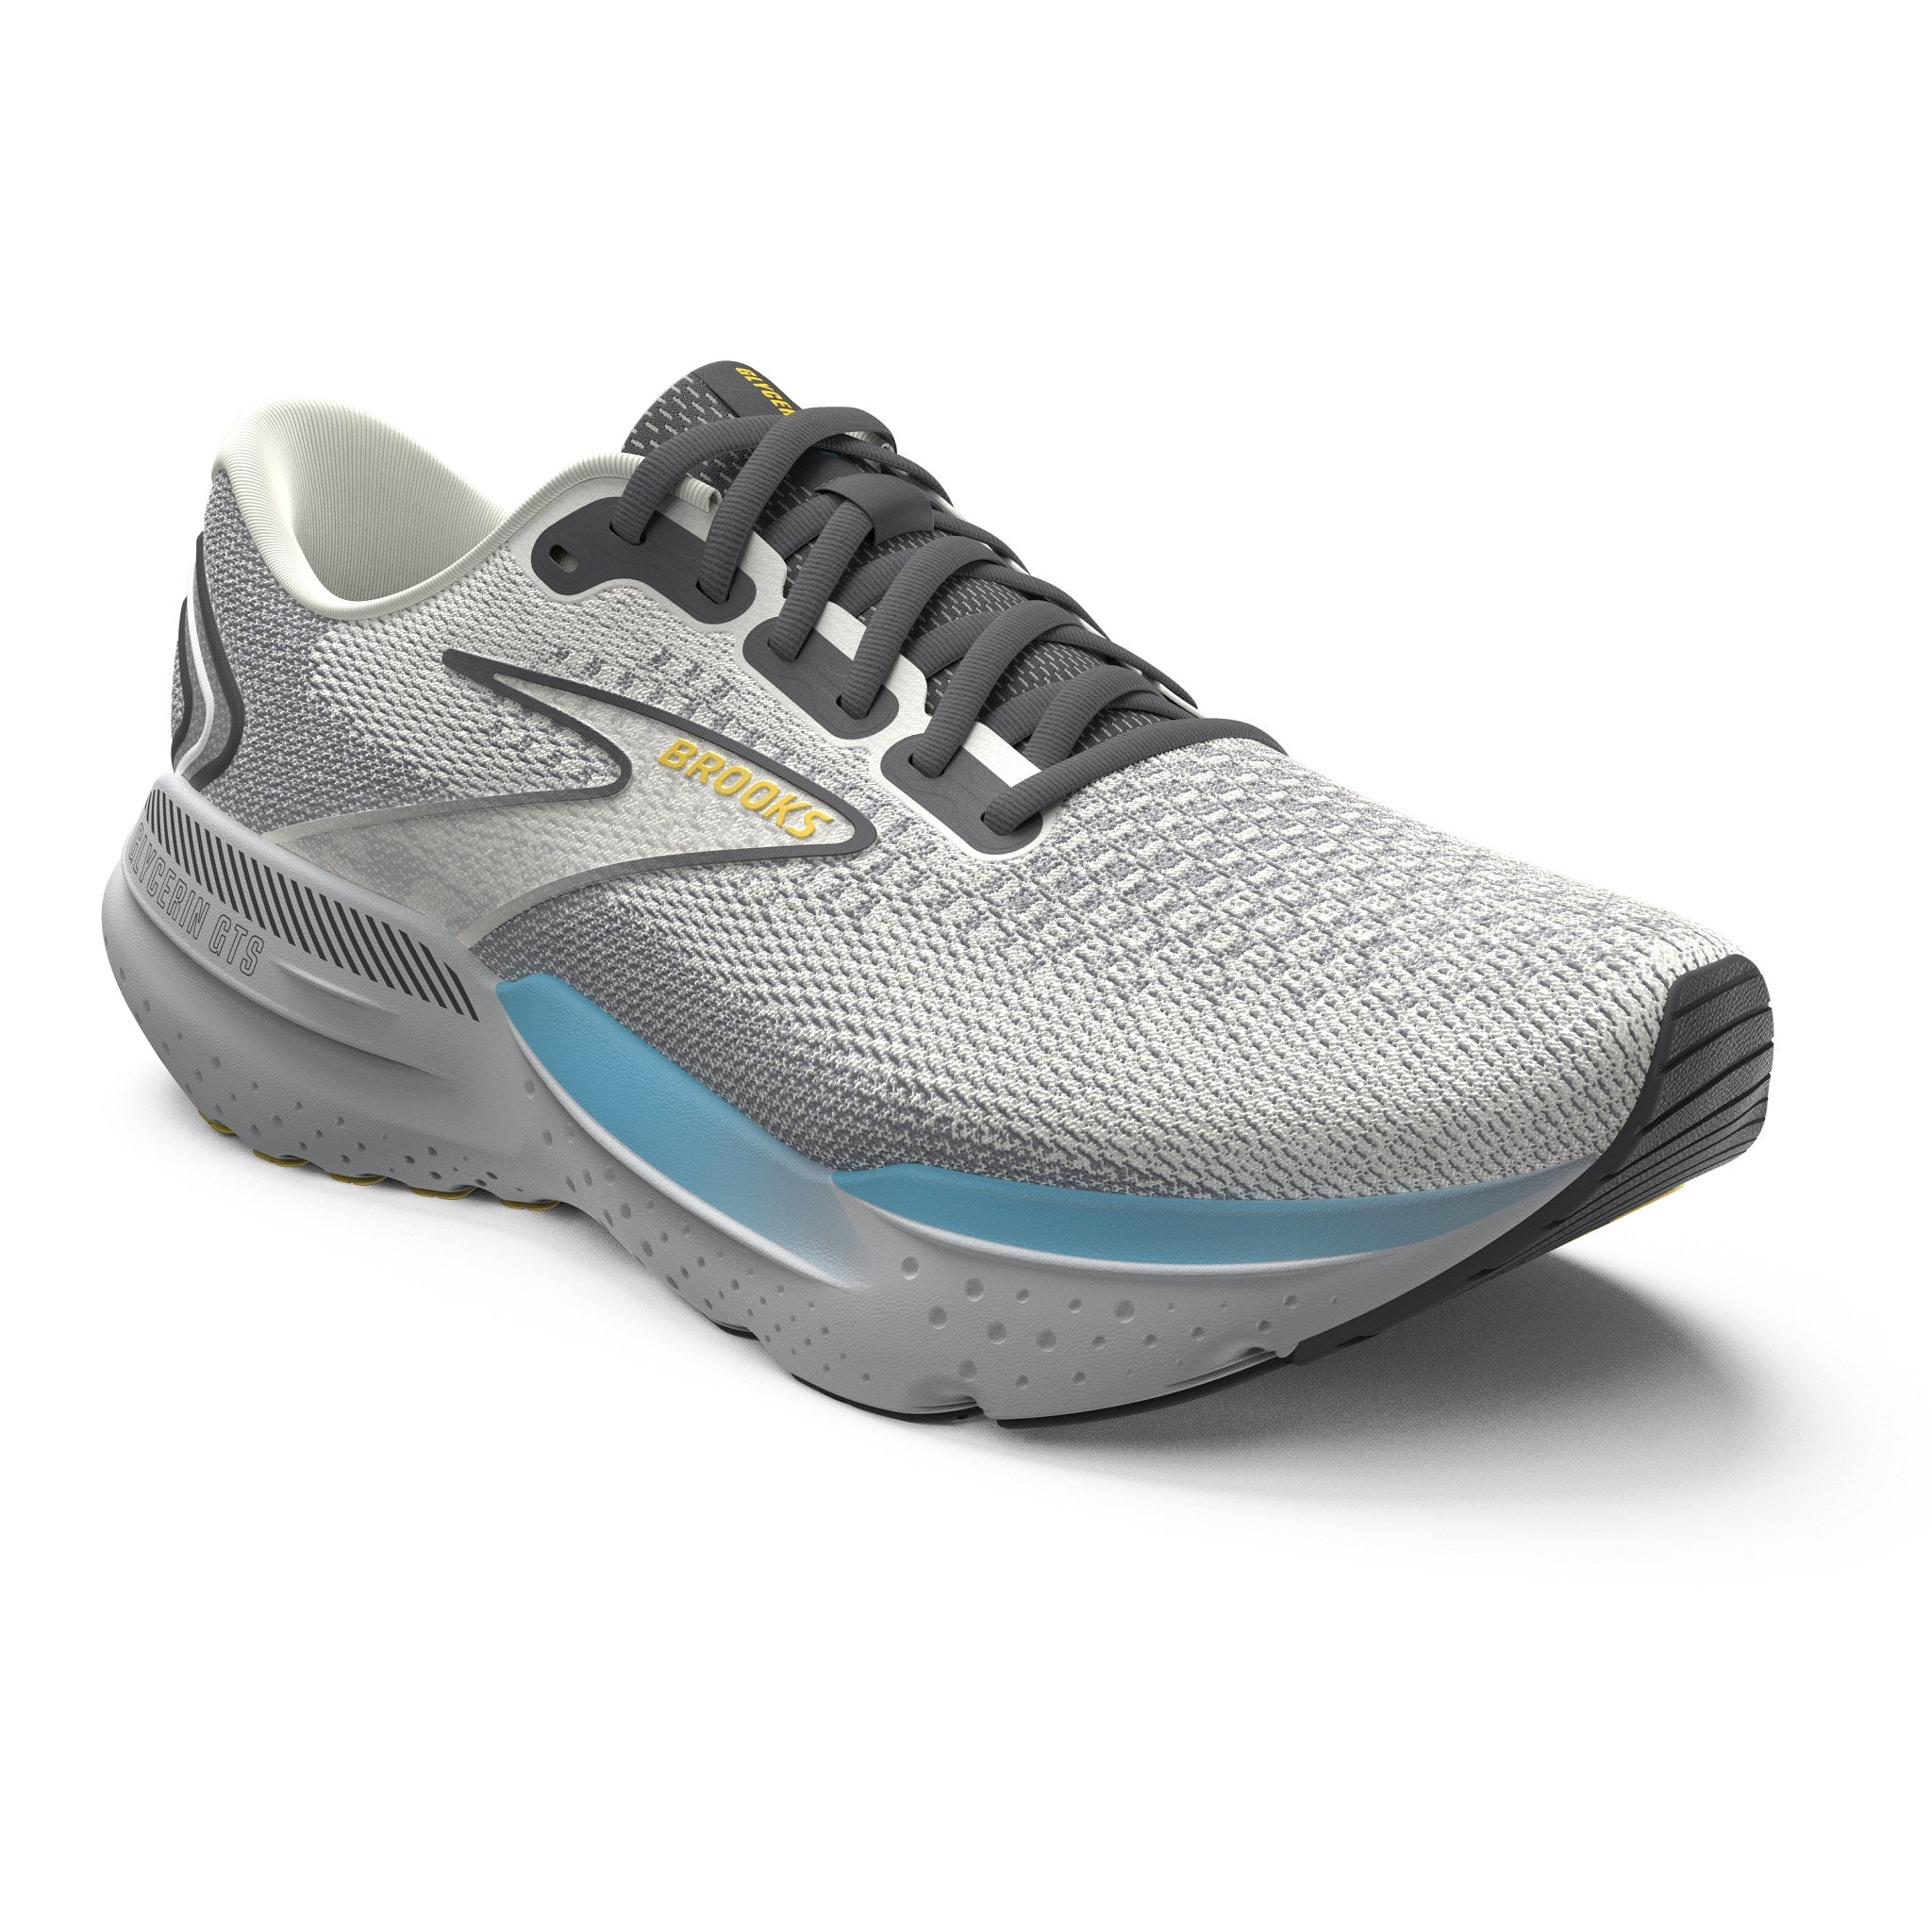 BROOKS MEN'S GLYCERIN GTS 21 - D - 184 COCONUT/FORGED IRON/YELLOW 